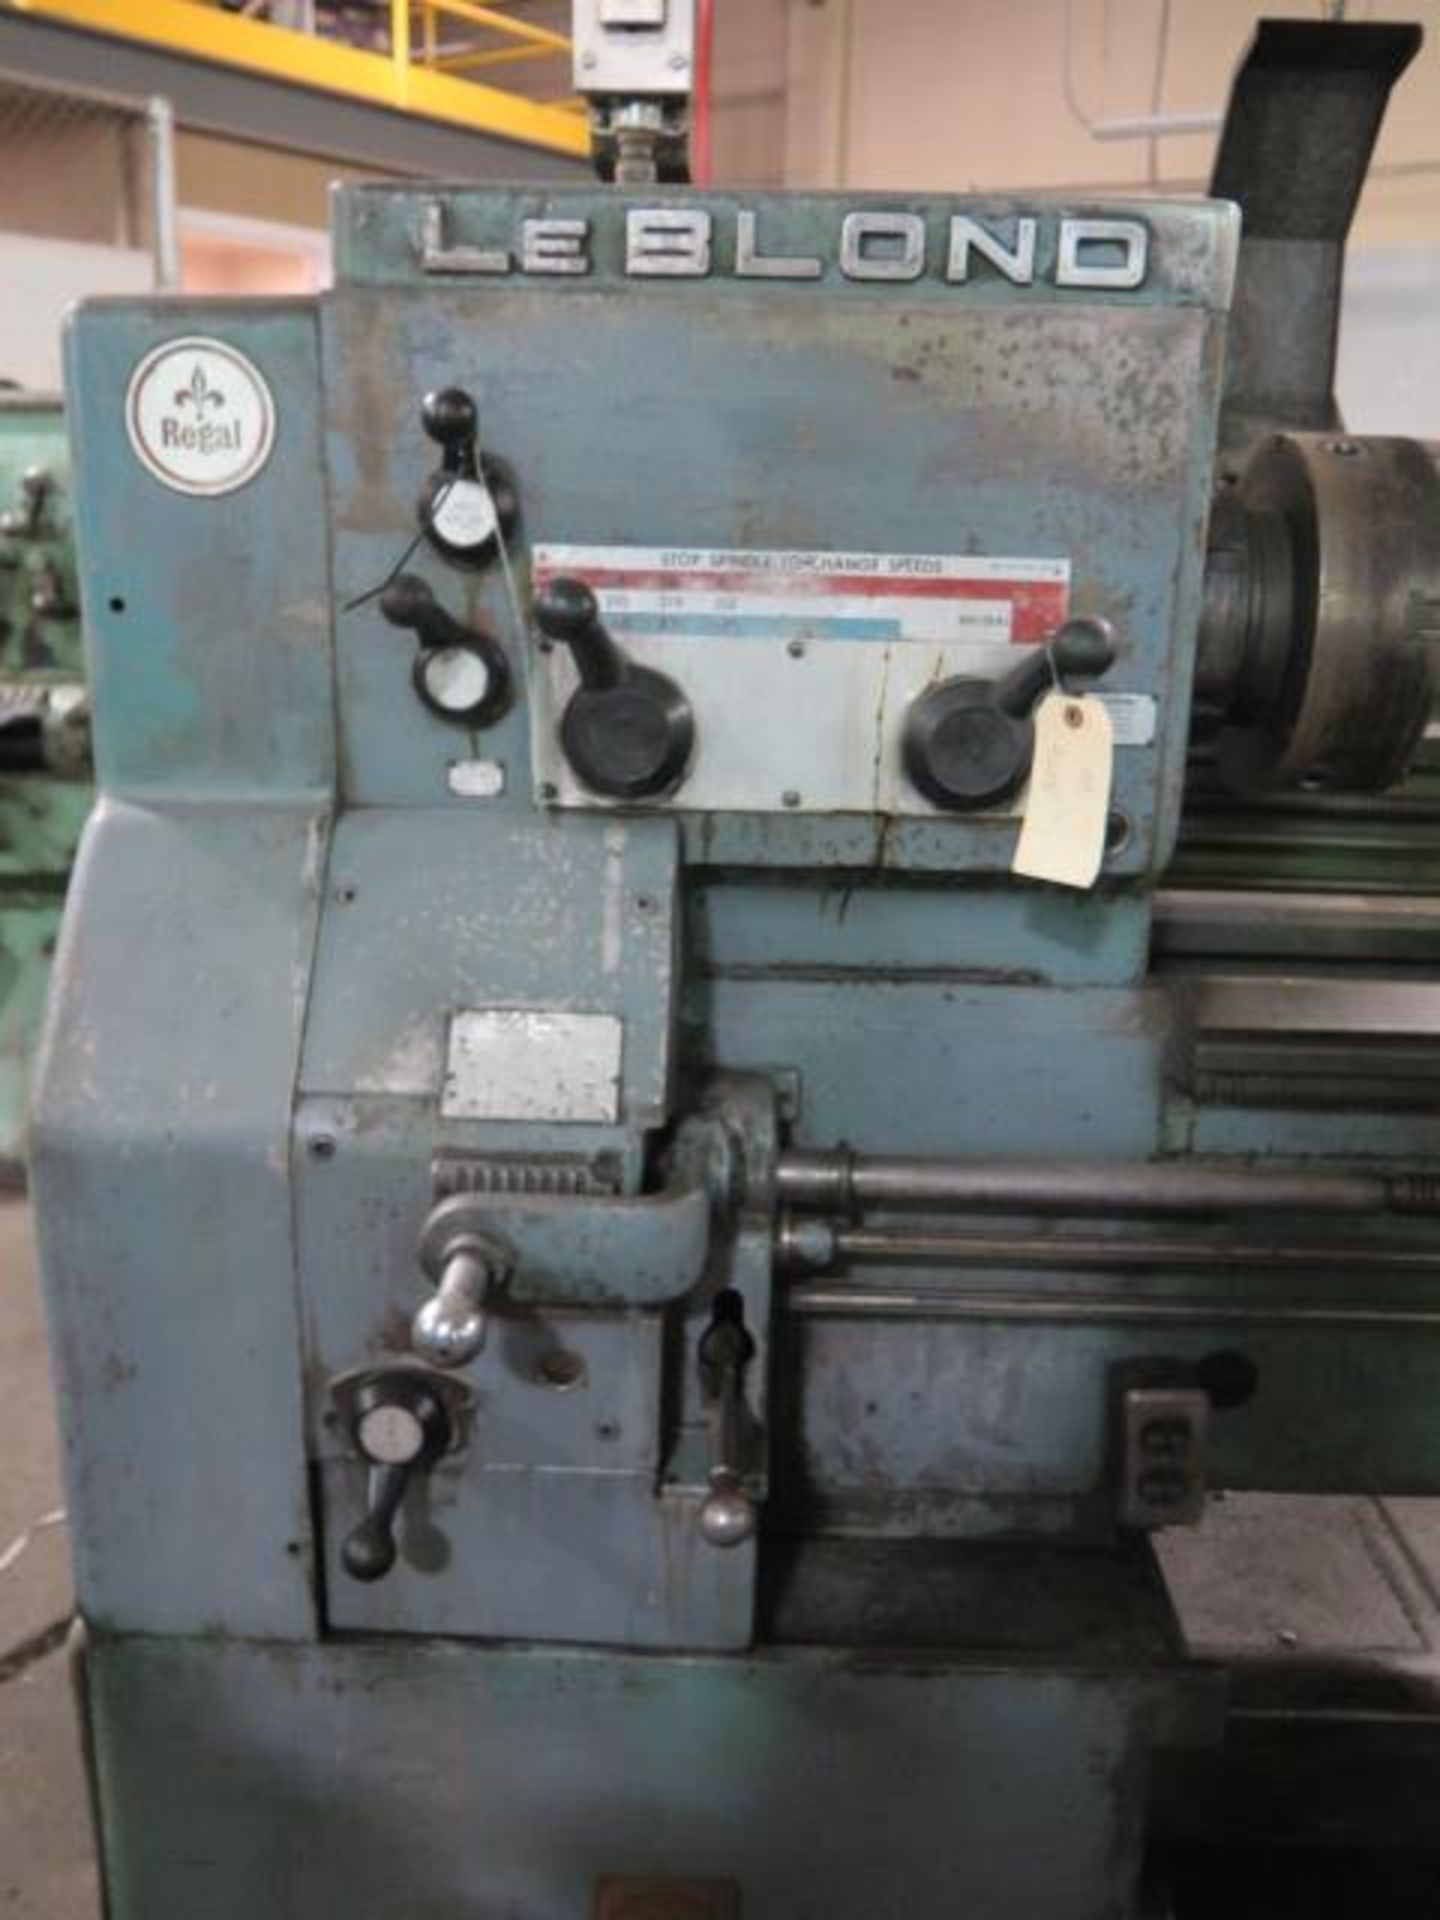 LeBlond Regal 19” x 58” Geared Head Lathe w/ 40-1600 RPM, Inch Threading, Tailstock, SOLD AS IS - Image 10 of 14